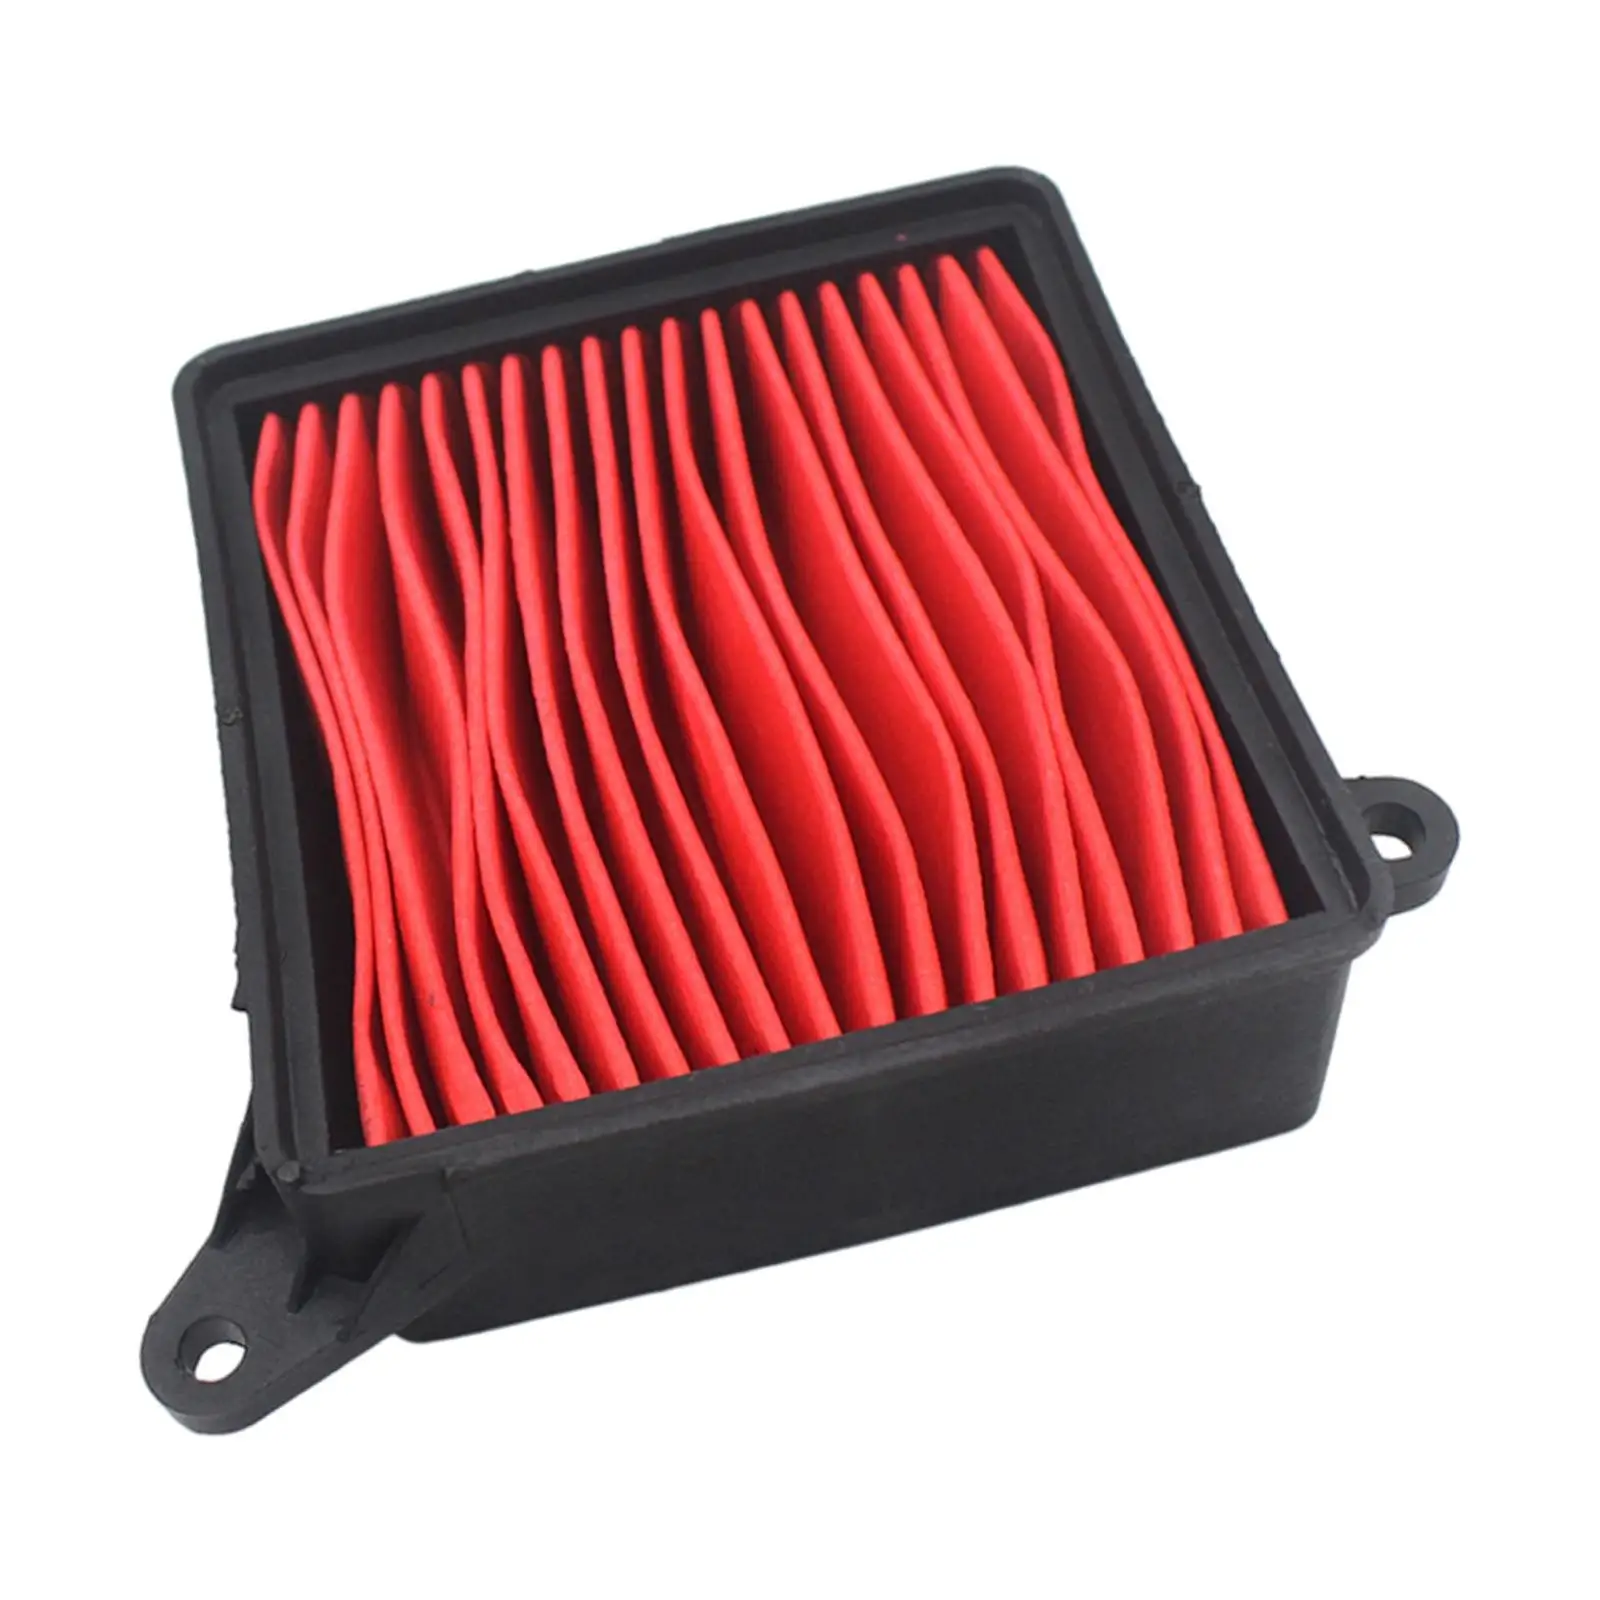 Motorcycle Air Filter Cleaner for Kymco Agility 125R 125cc, Lightweight